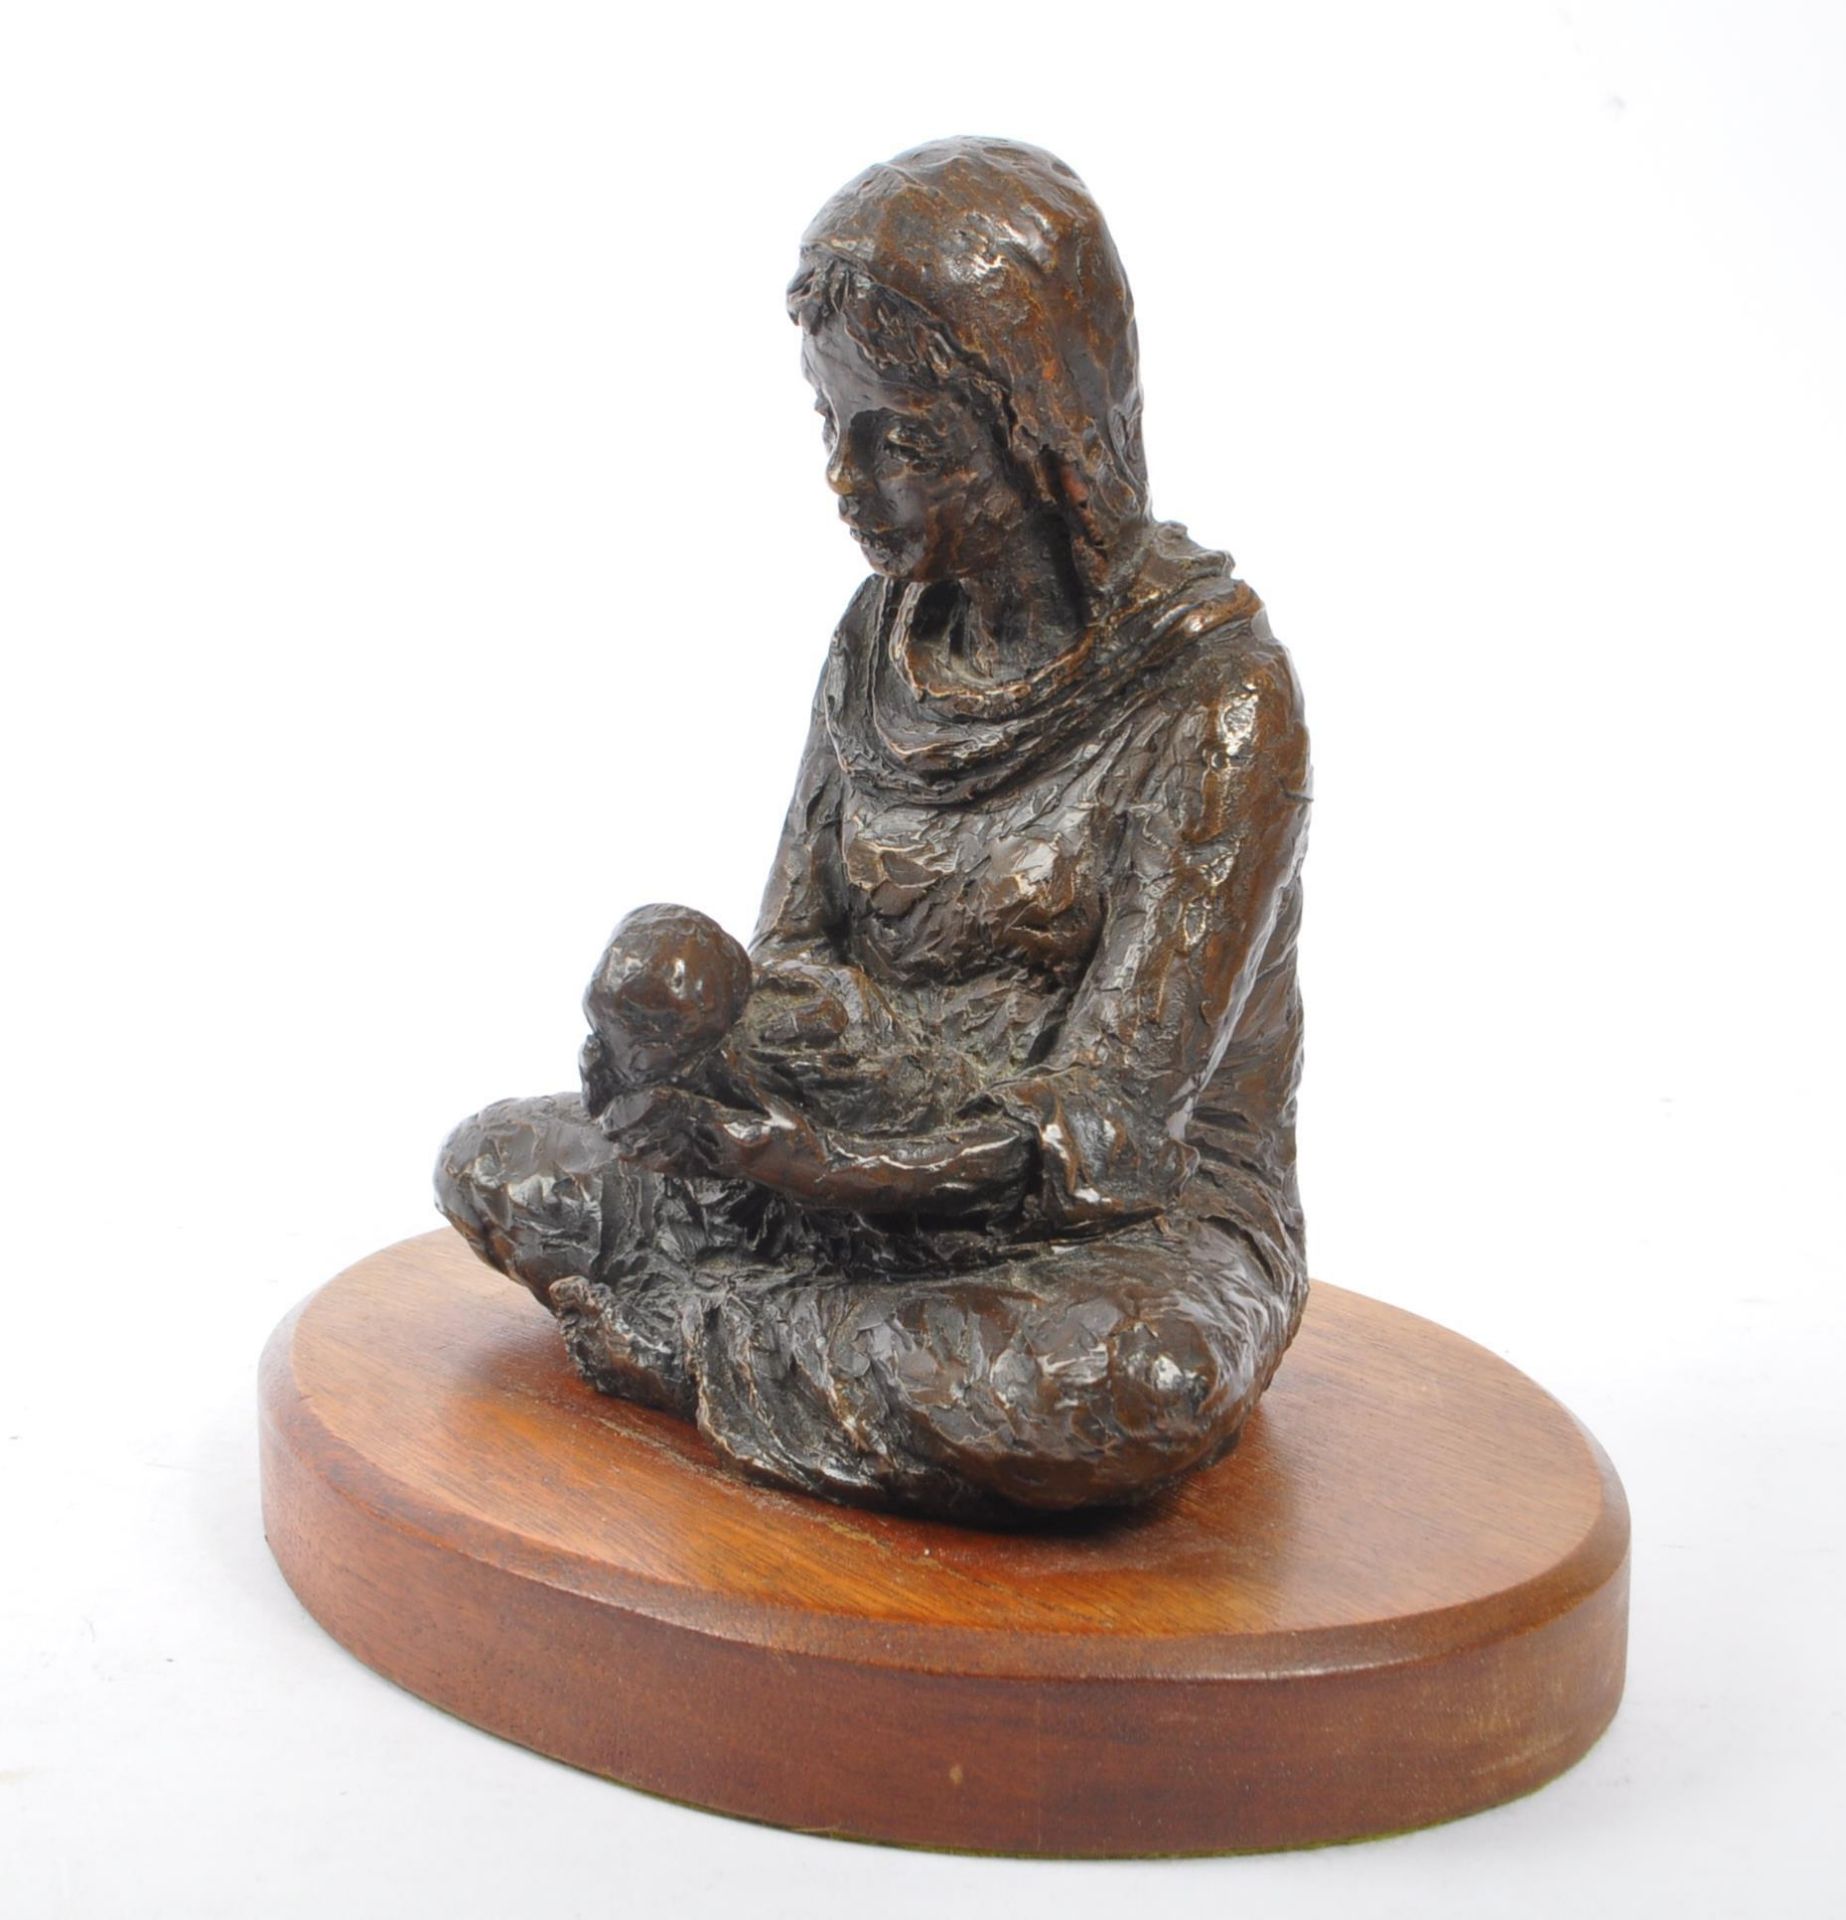 VINTAGE 20TH CENTURY SPELTER FIGURE OF WOMAN HOLDING BABY - Image 5 of 6